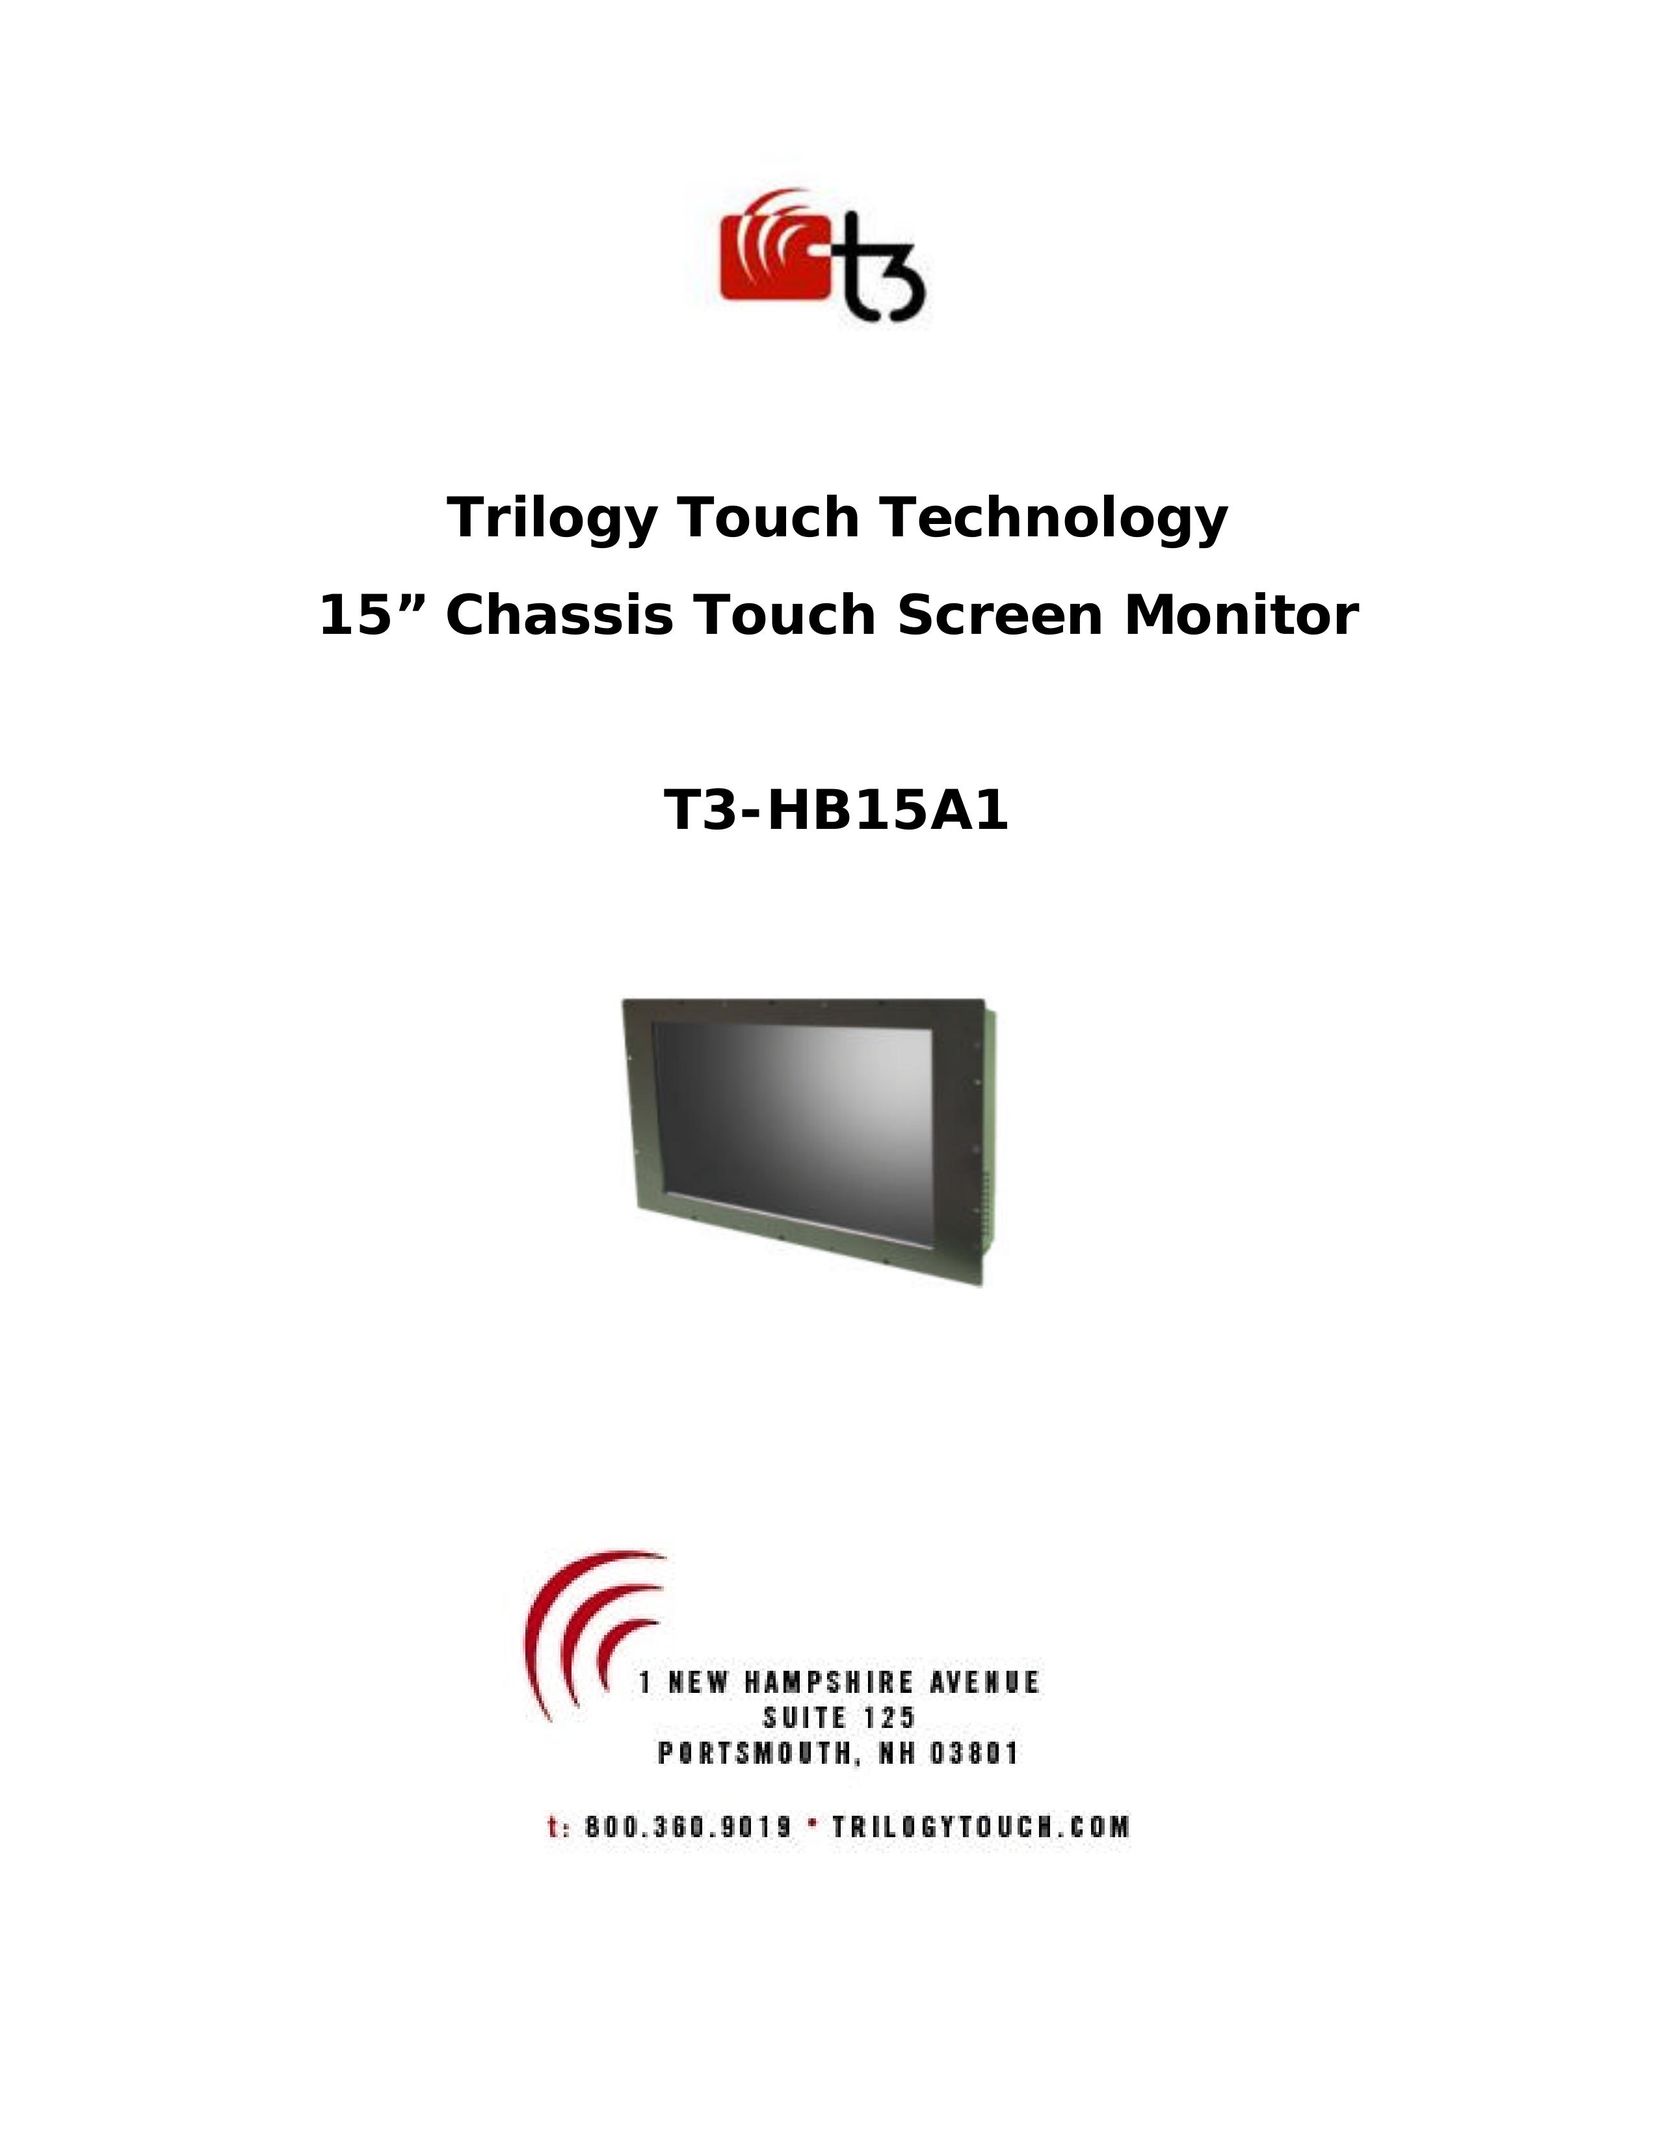 Trilogy Touch Technology T3-HB15A1 Computer Monitor User Manual